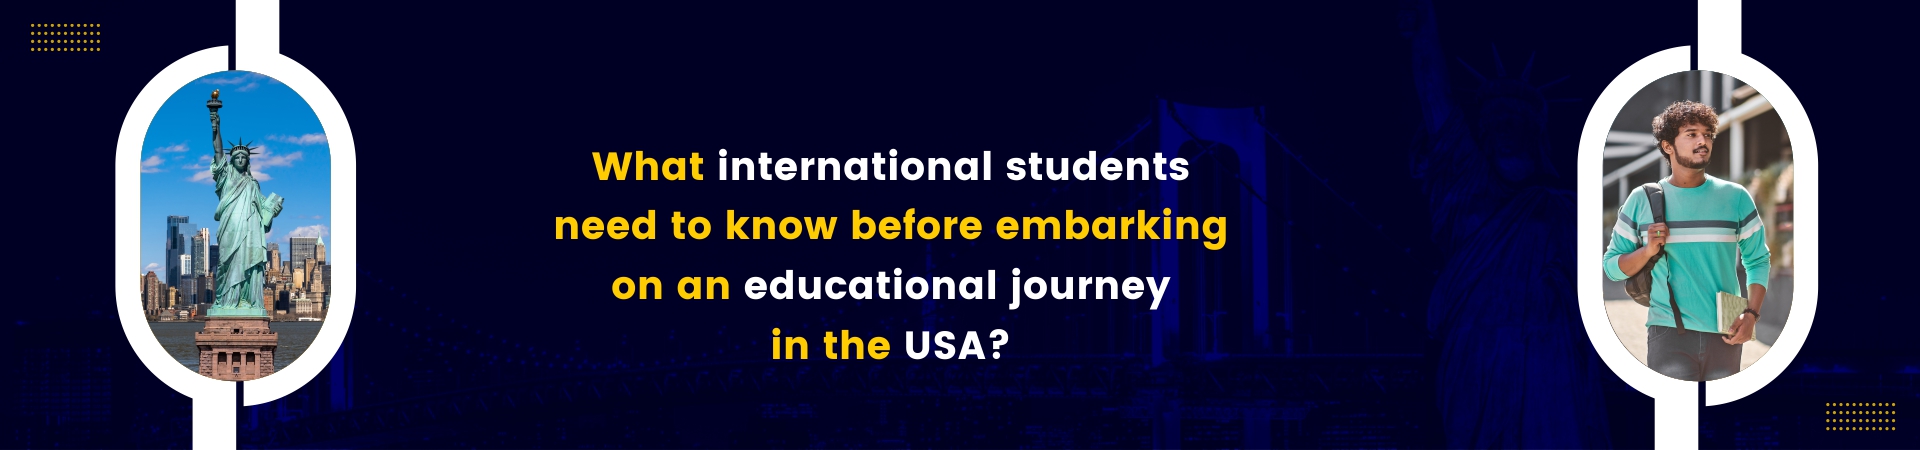 What international students need to know before embarking on an educational journey in the USA?